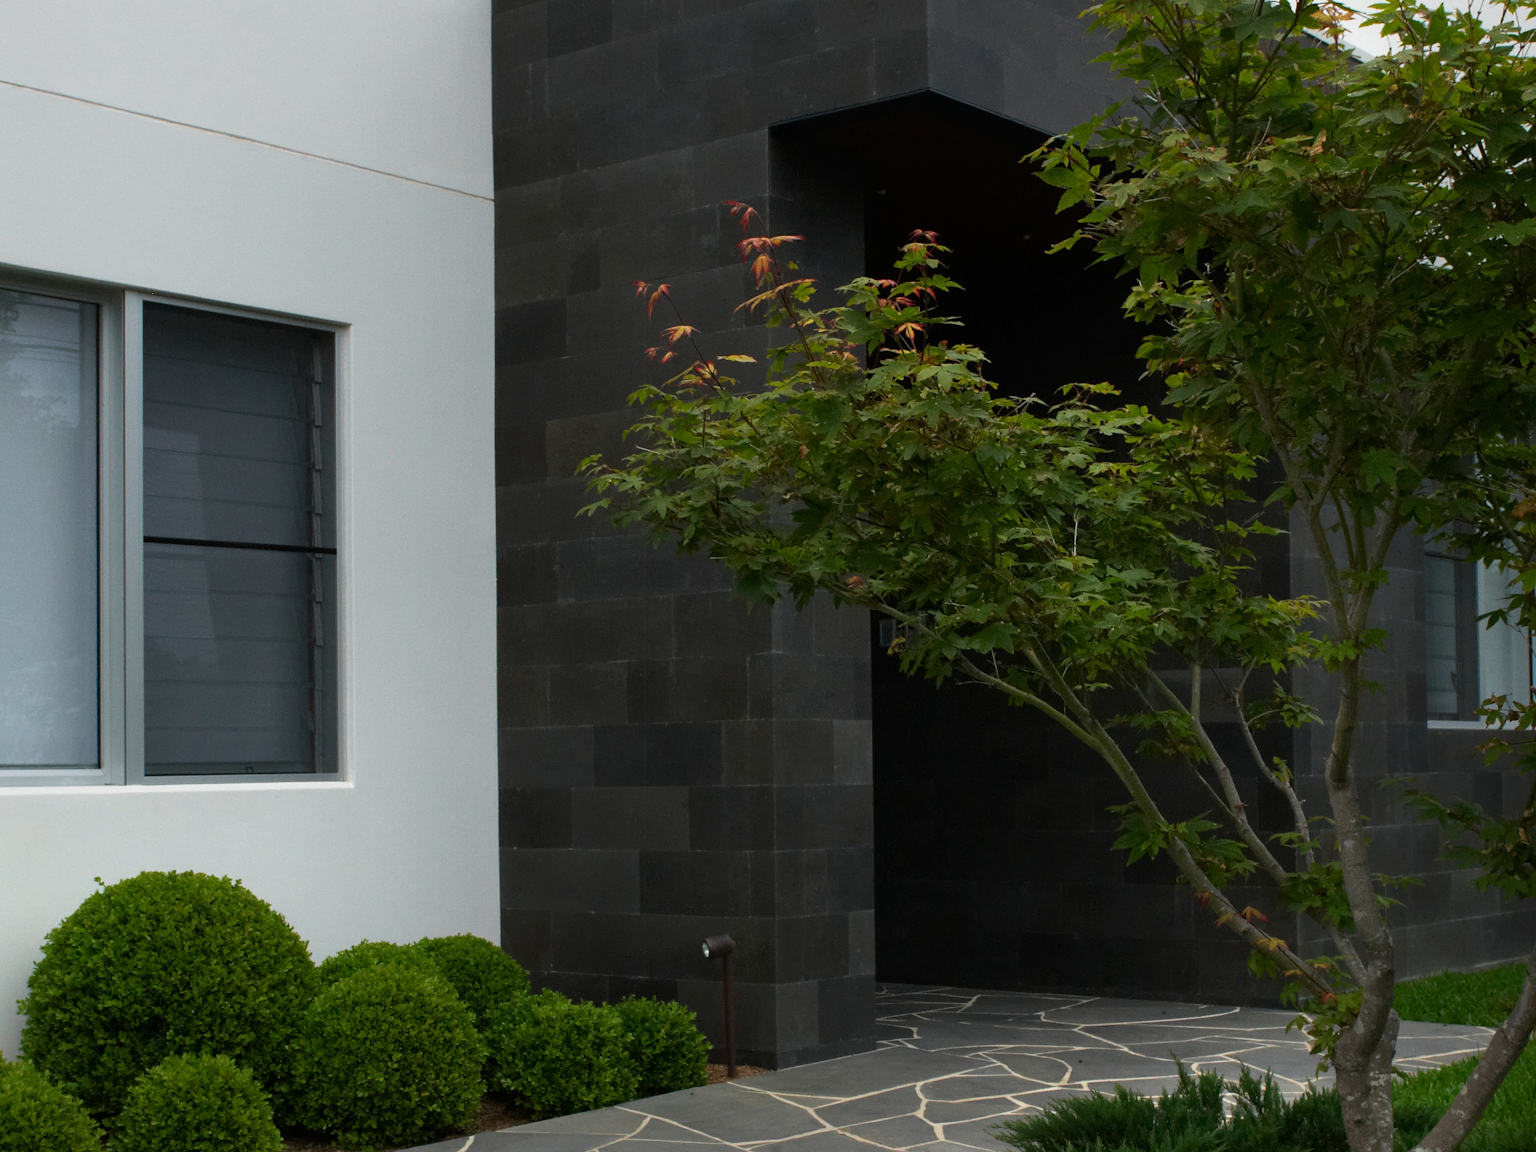 Residential facade clad with Honed bluestone traditional format walling and bluestone crazy paving pathway